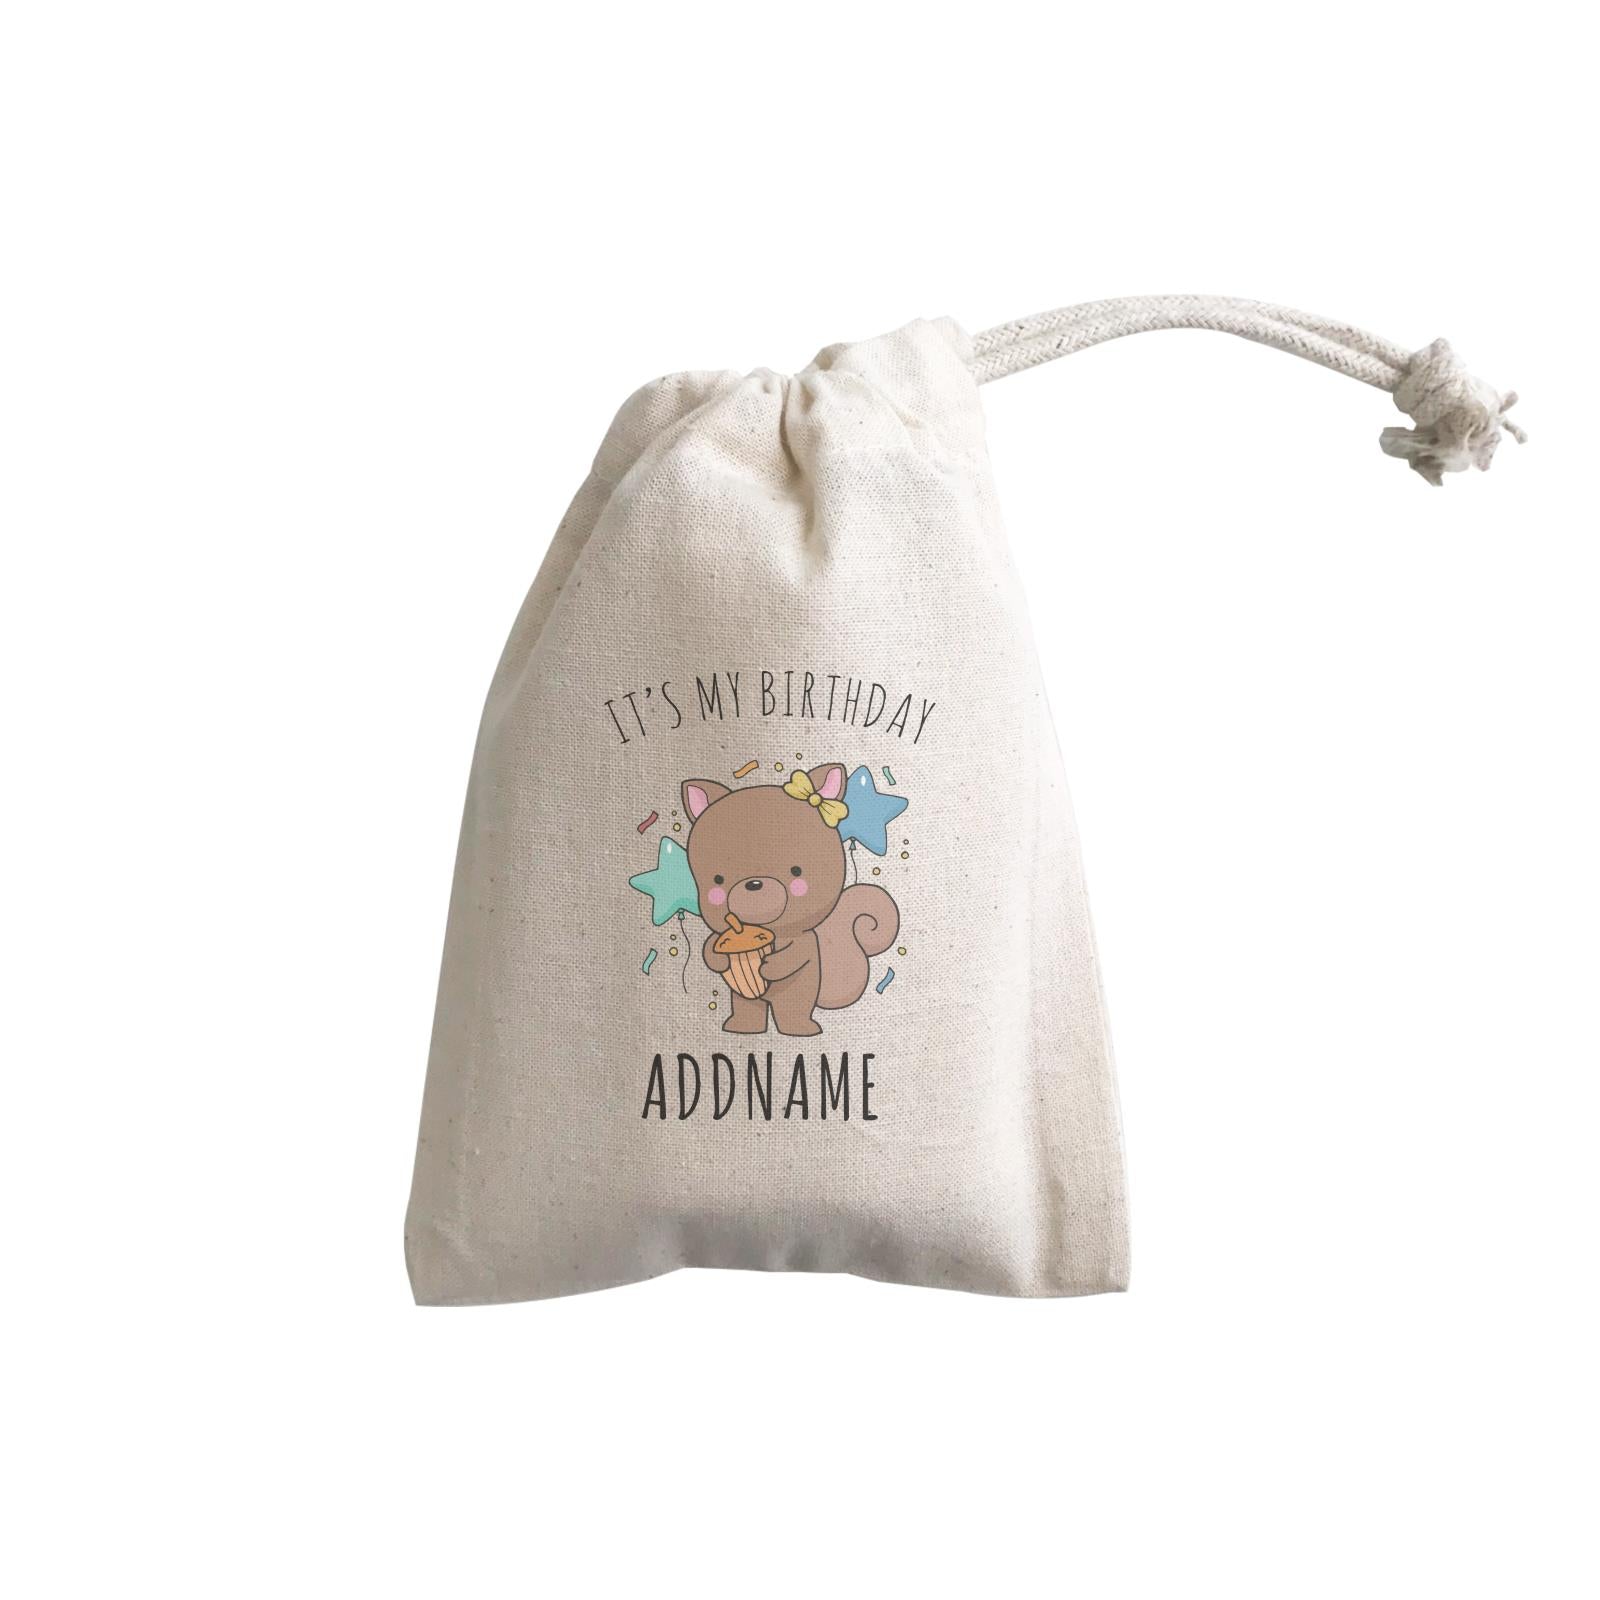 Birthday Sketch Animals Squirrel with Acorn It's My Birthday Addname GP Gift Pouch